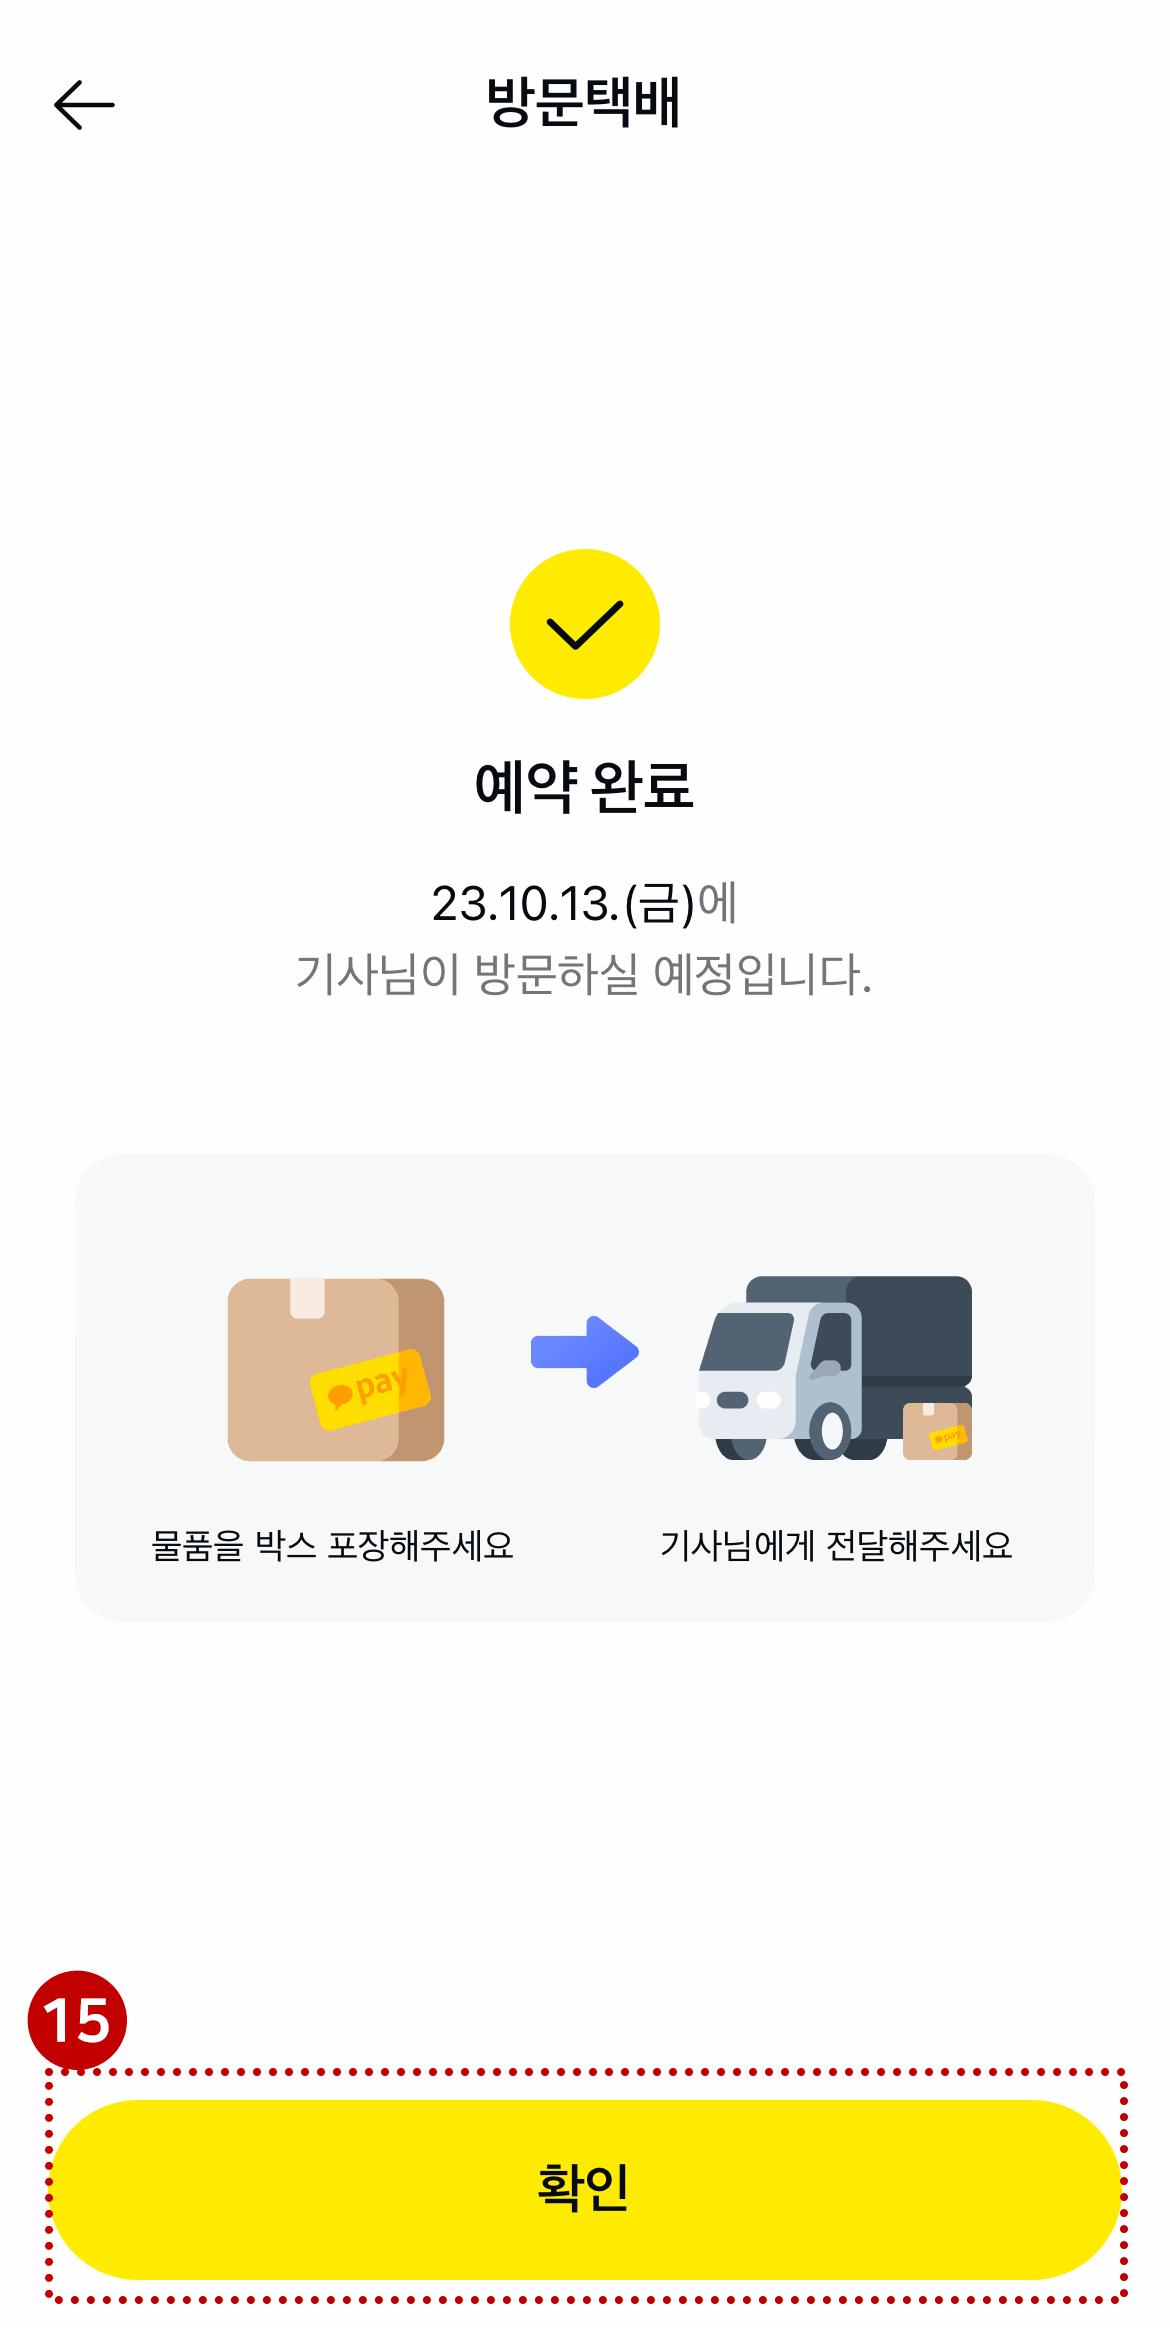 Delivery Kakao - 15.png.jpg